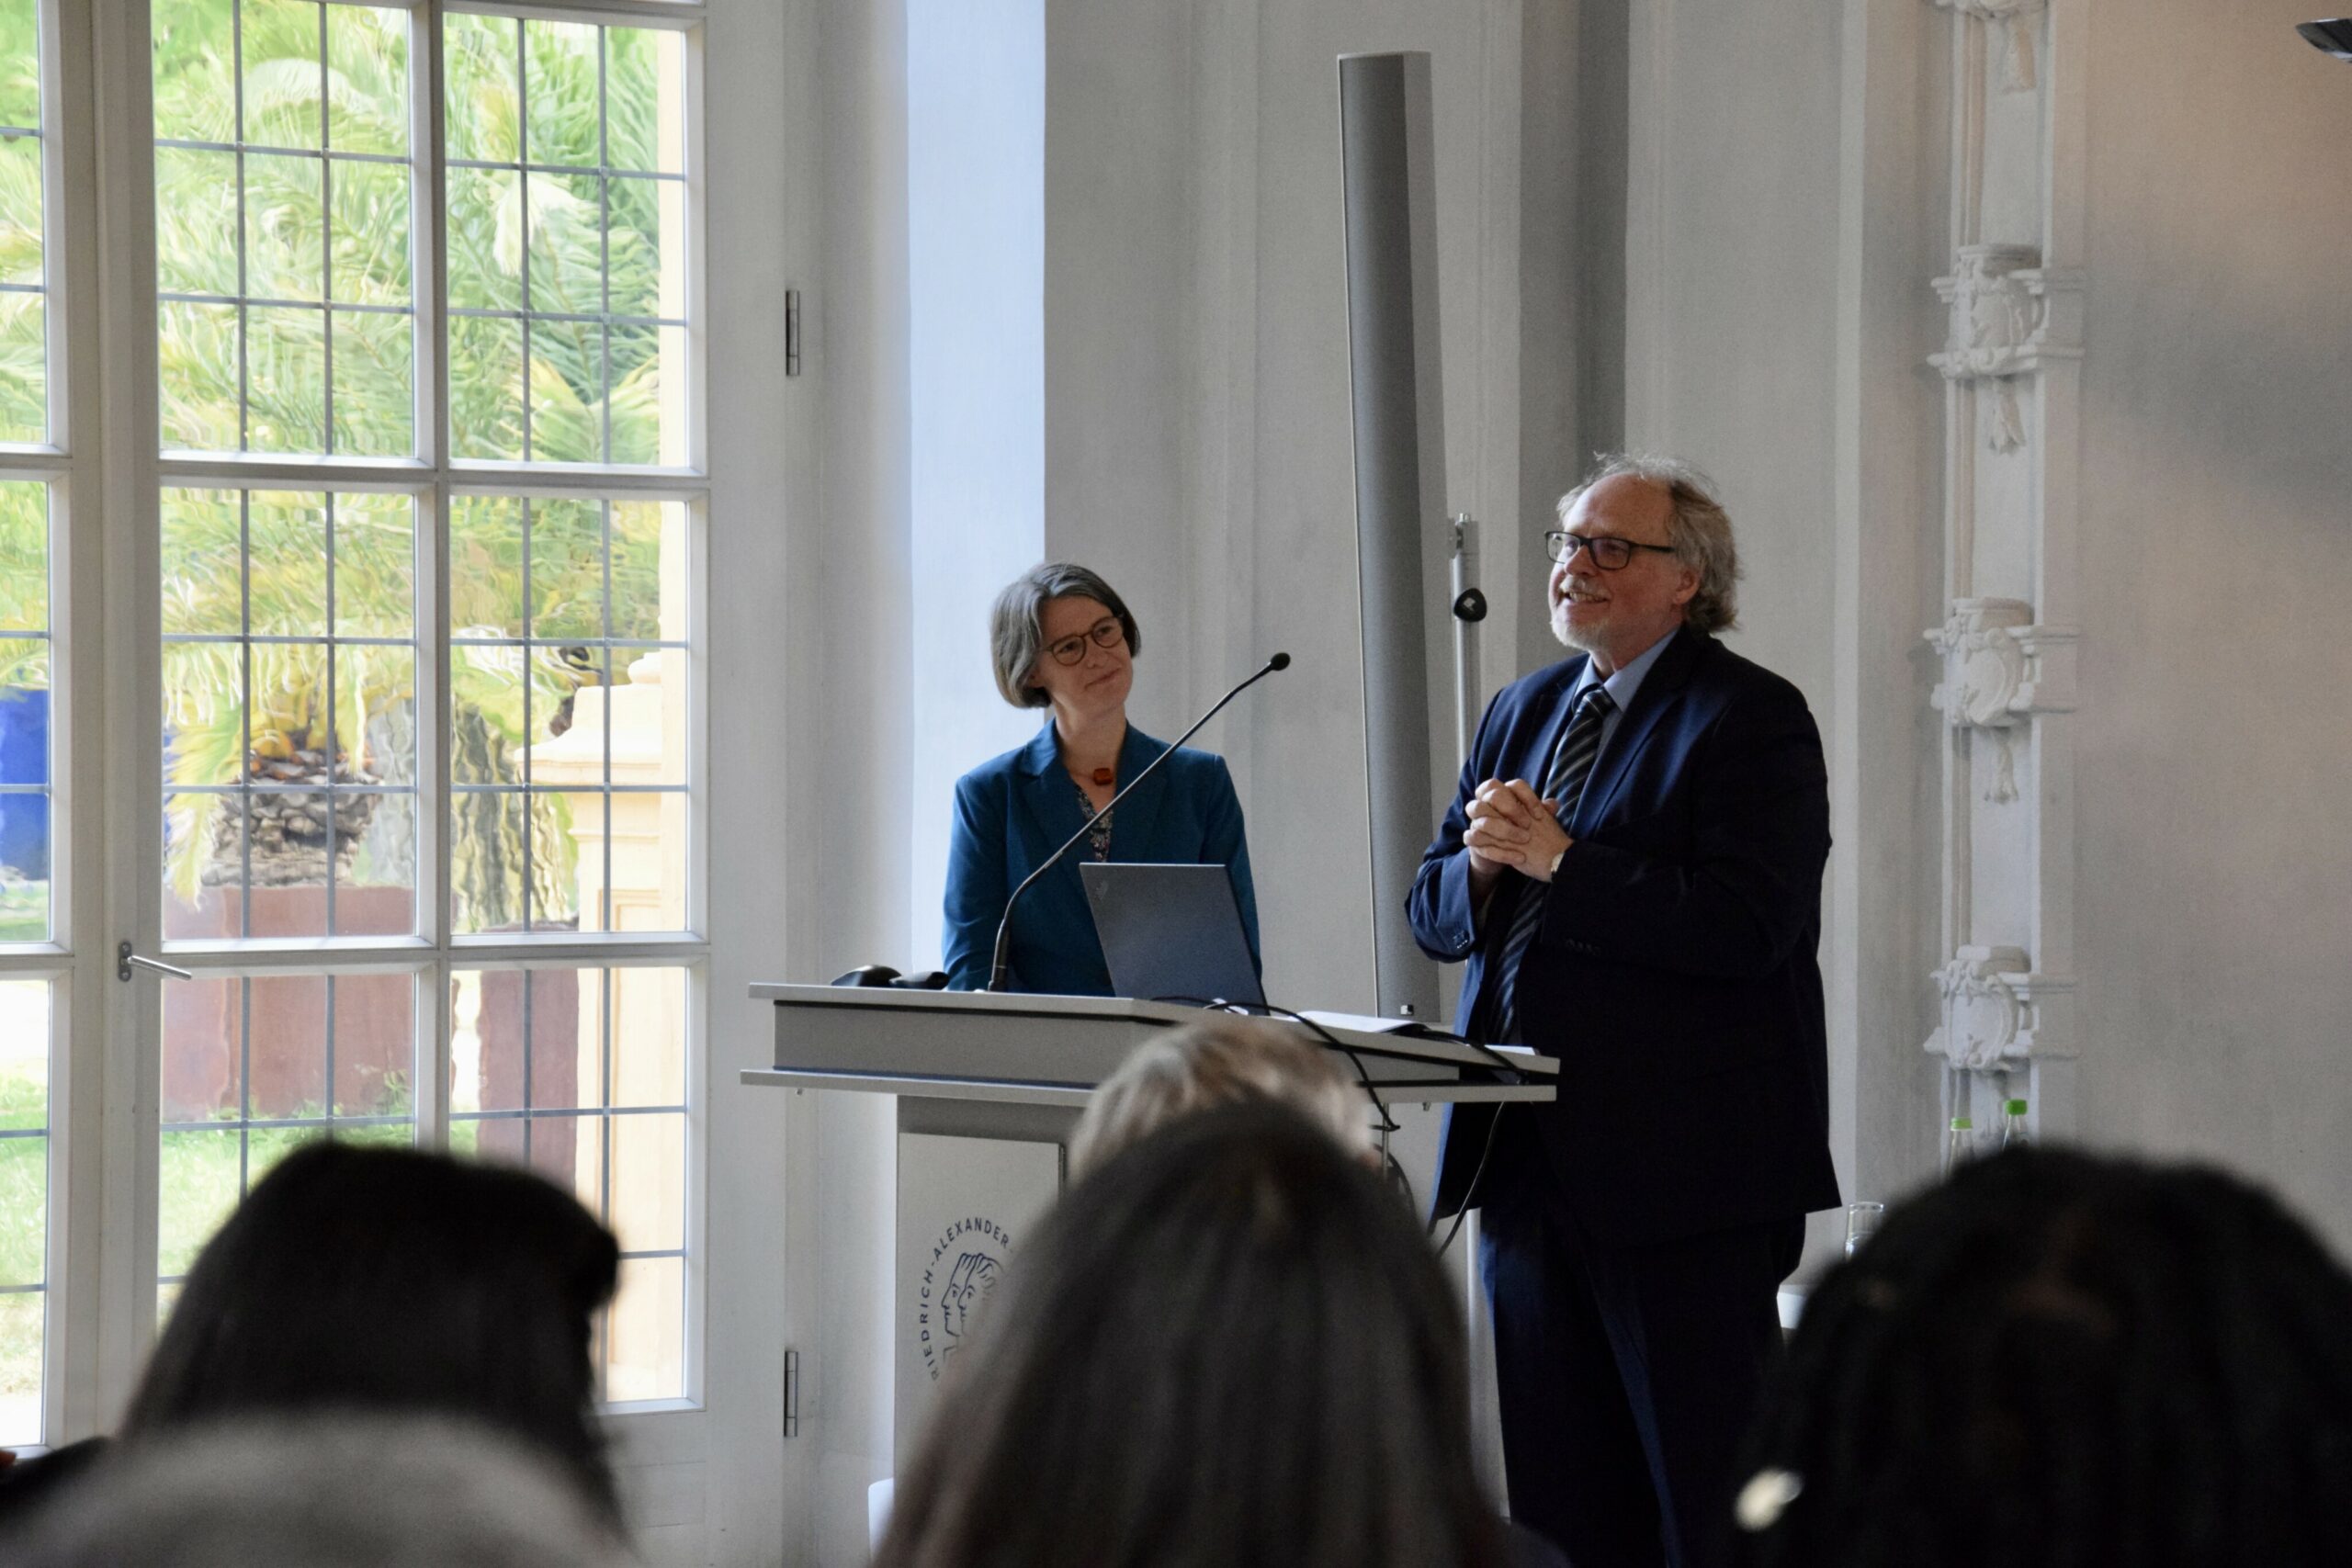 Picture of Prof. Heiner Bielefeldt and Prof. Kathrin Kinzelbach during their speech at the Conferral.